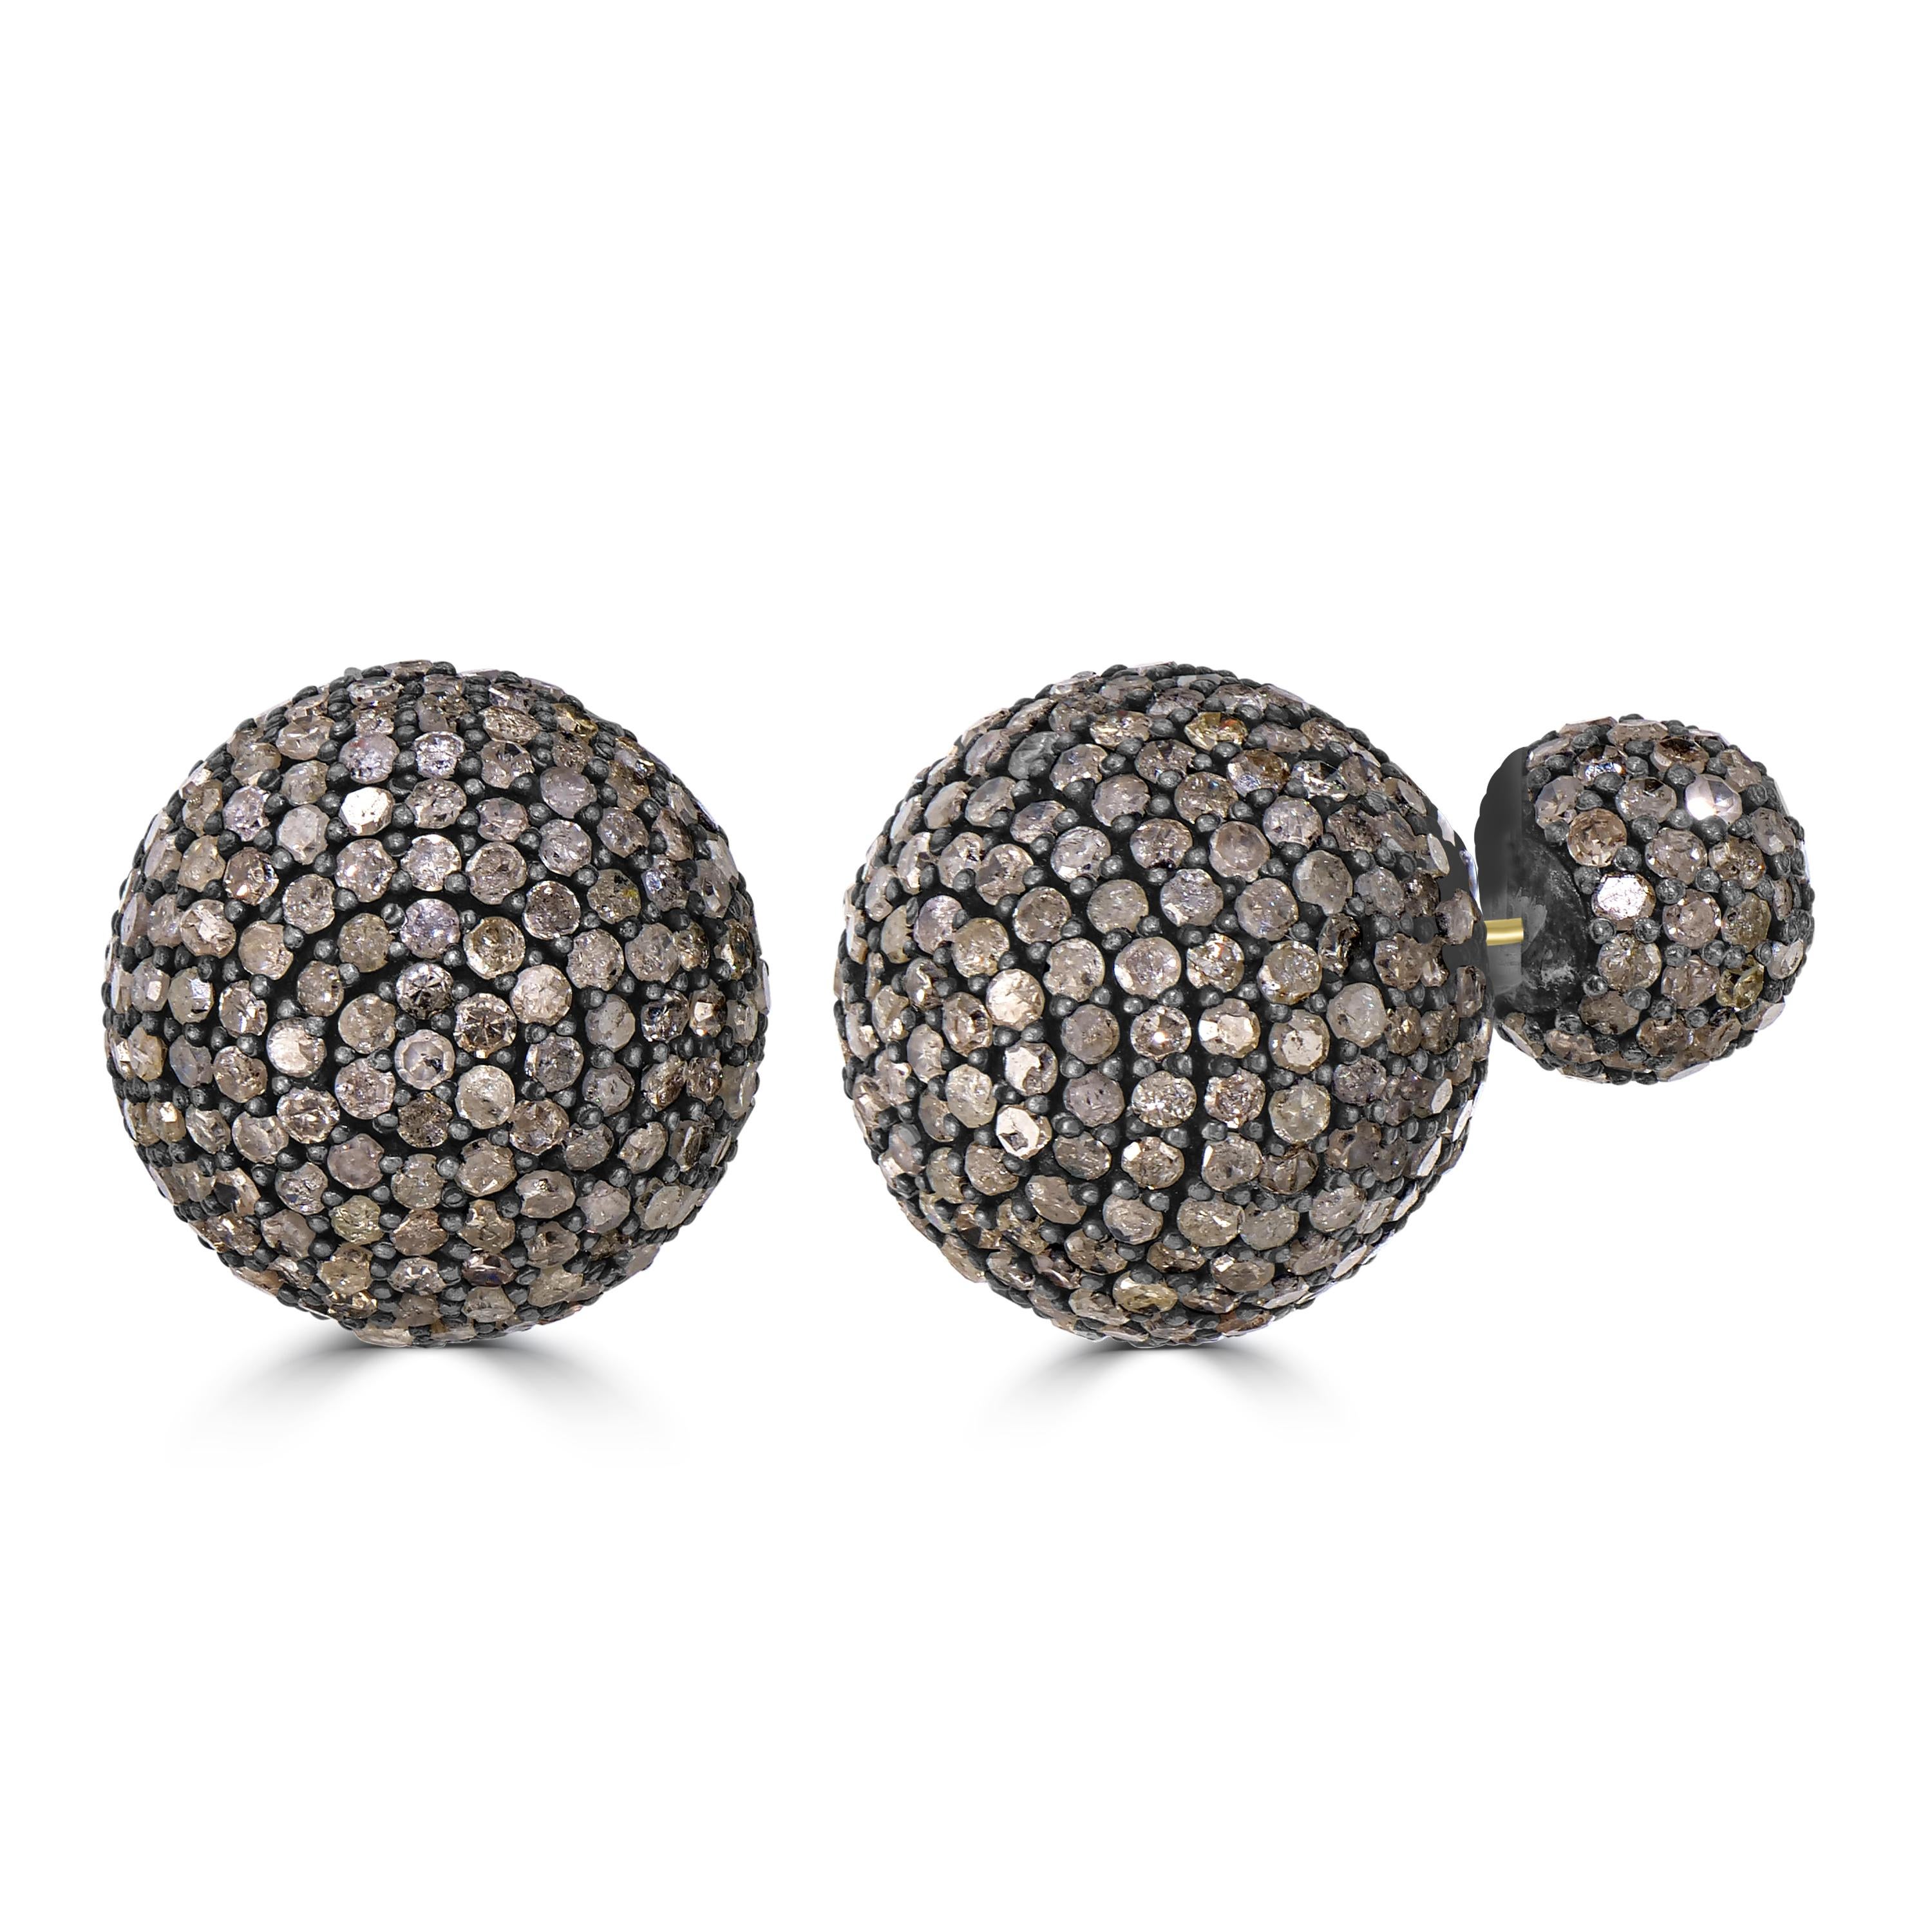 Introducing the Victorian 9.48 Cttw. Diamond Double Globe Stud Earrings—a celestial masterpiece that transcends conventional elegance.

These stud earrings showcase two diamond globes connected by a delicately crafted 18k yellow gold pin, adding a